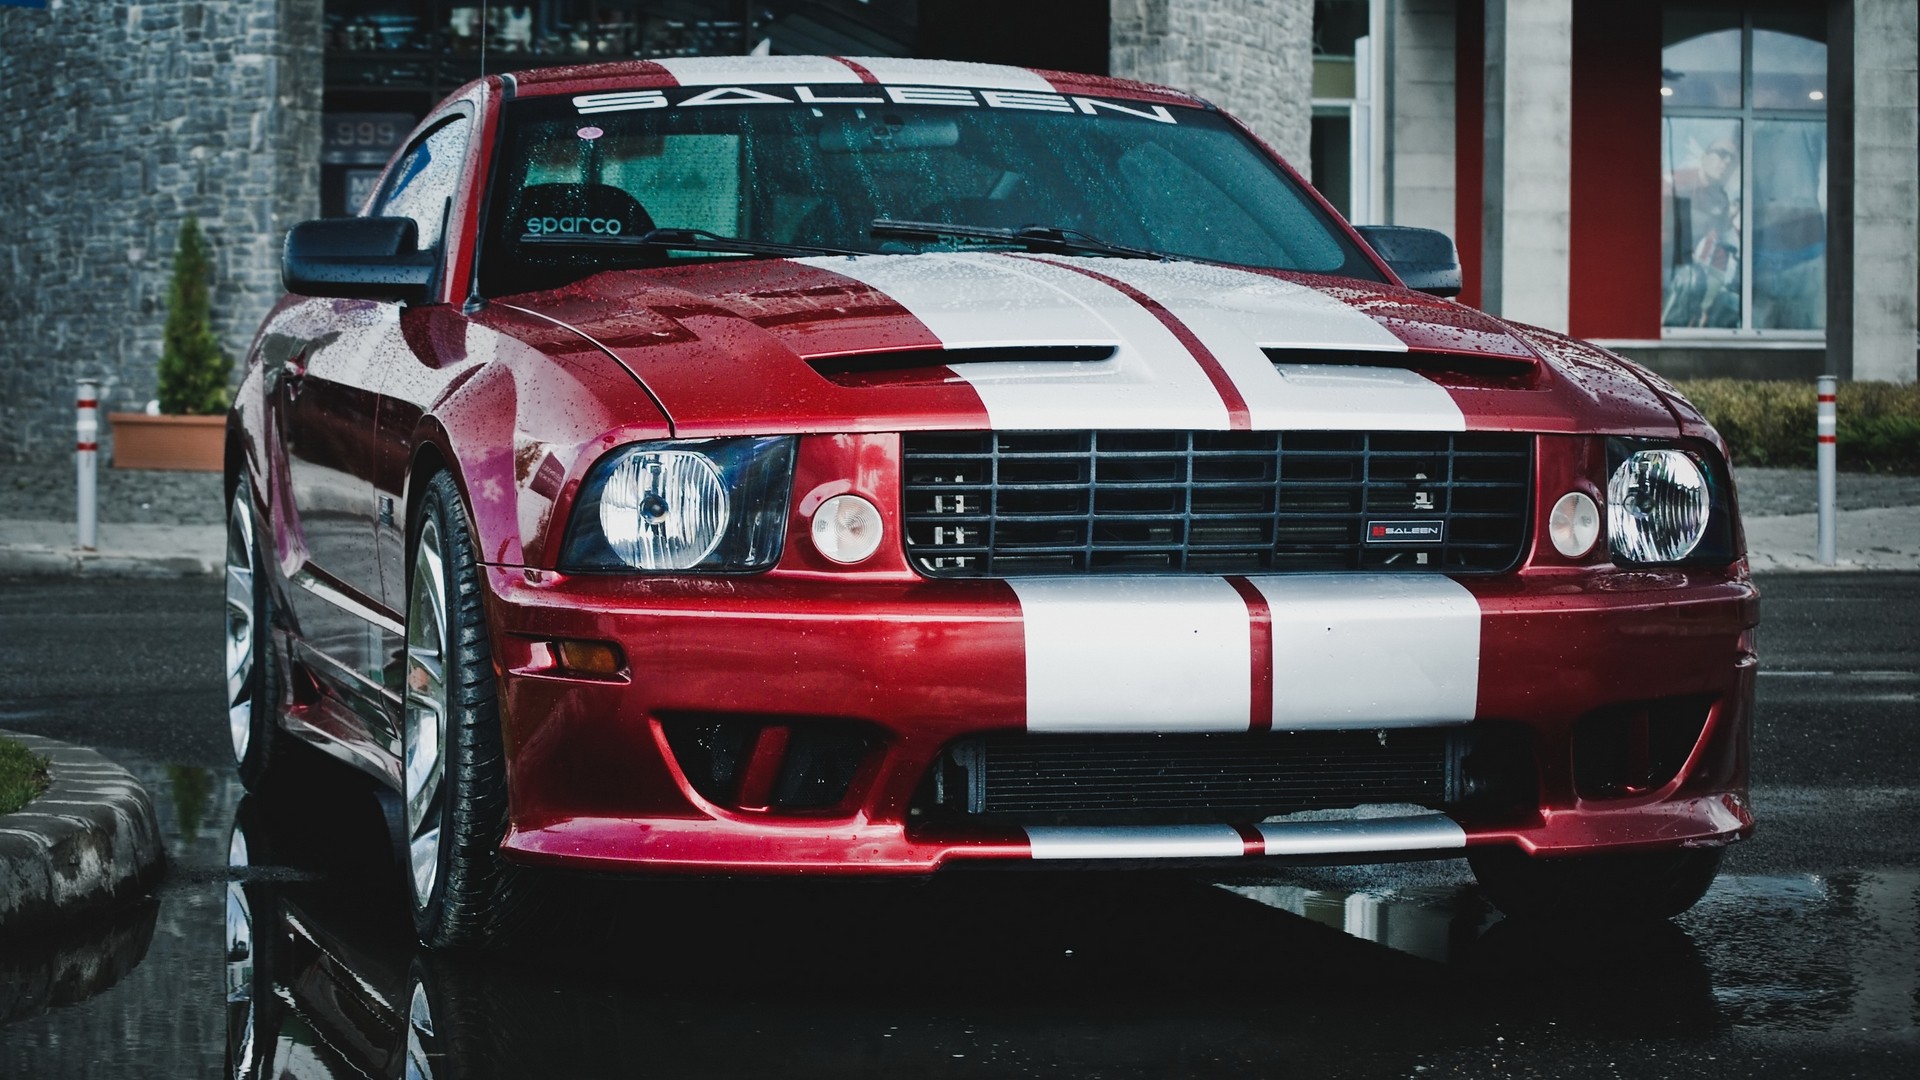 General 1920x1080 Ford Mustang car Ford vehicle red cars racing stripes Ford Mustang S-197 muscle cars American cars